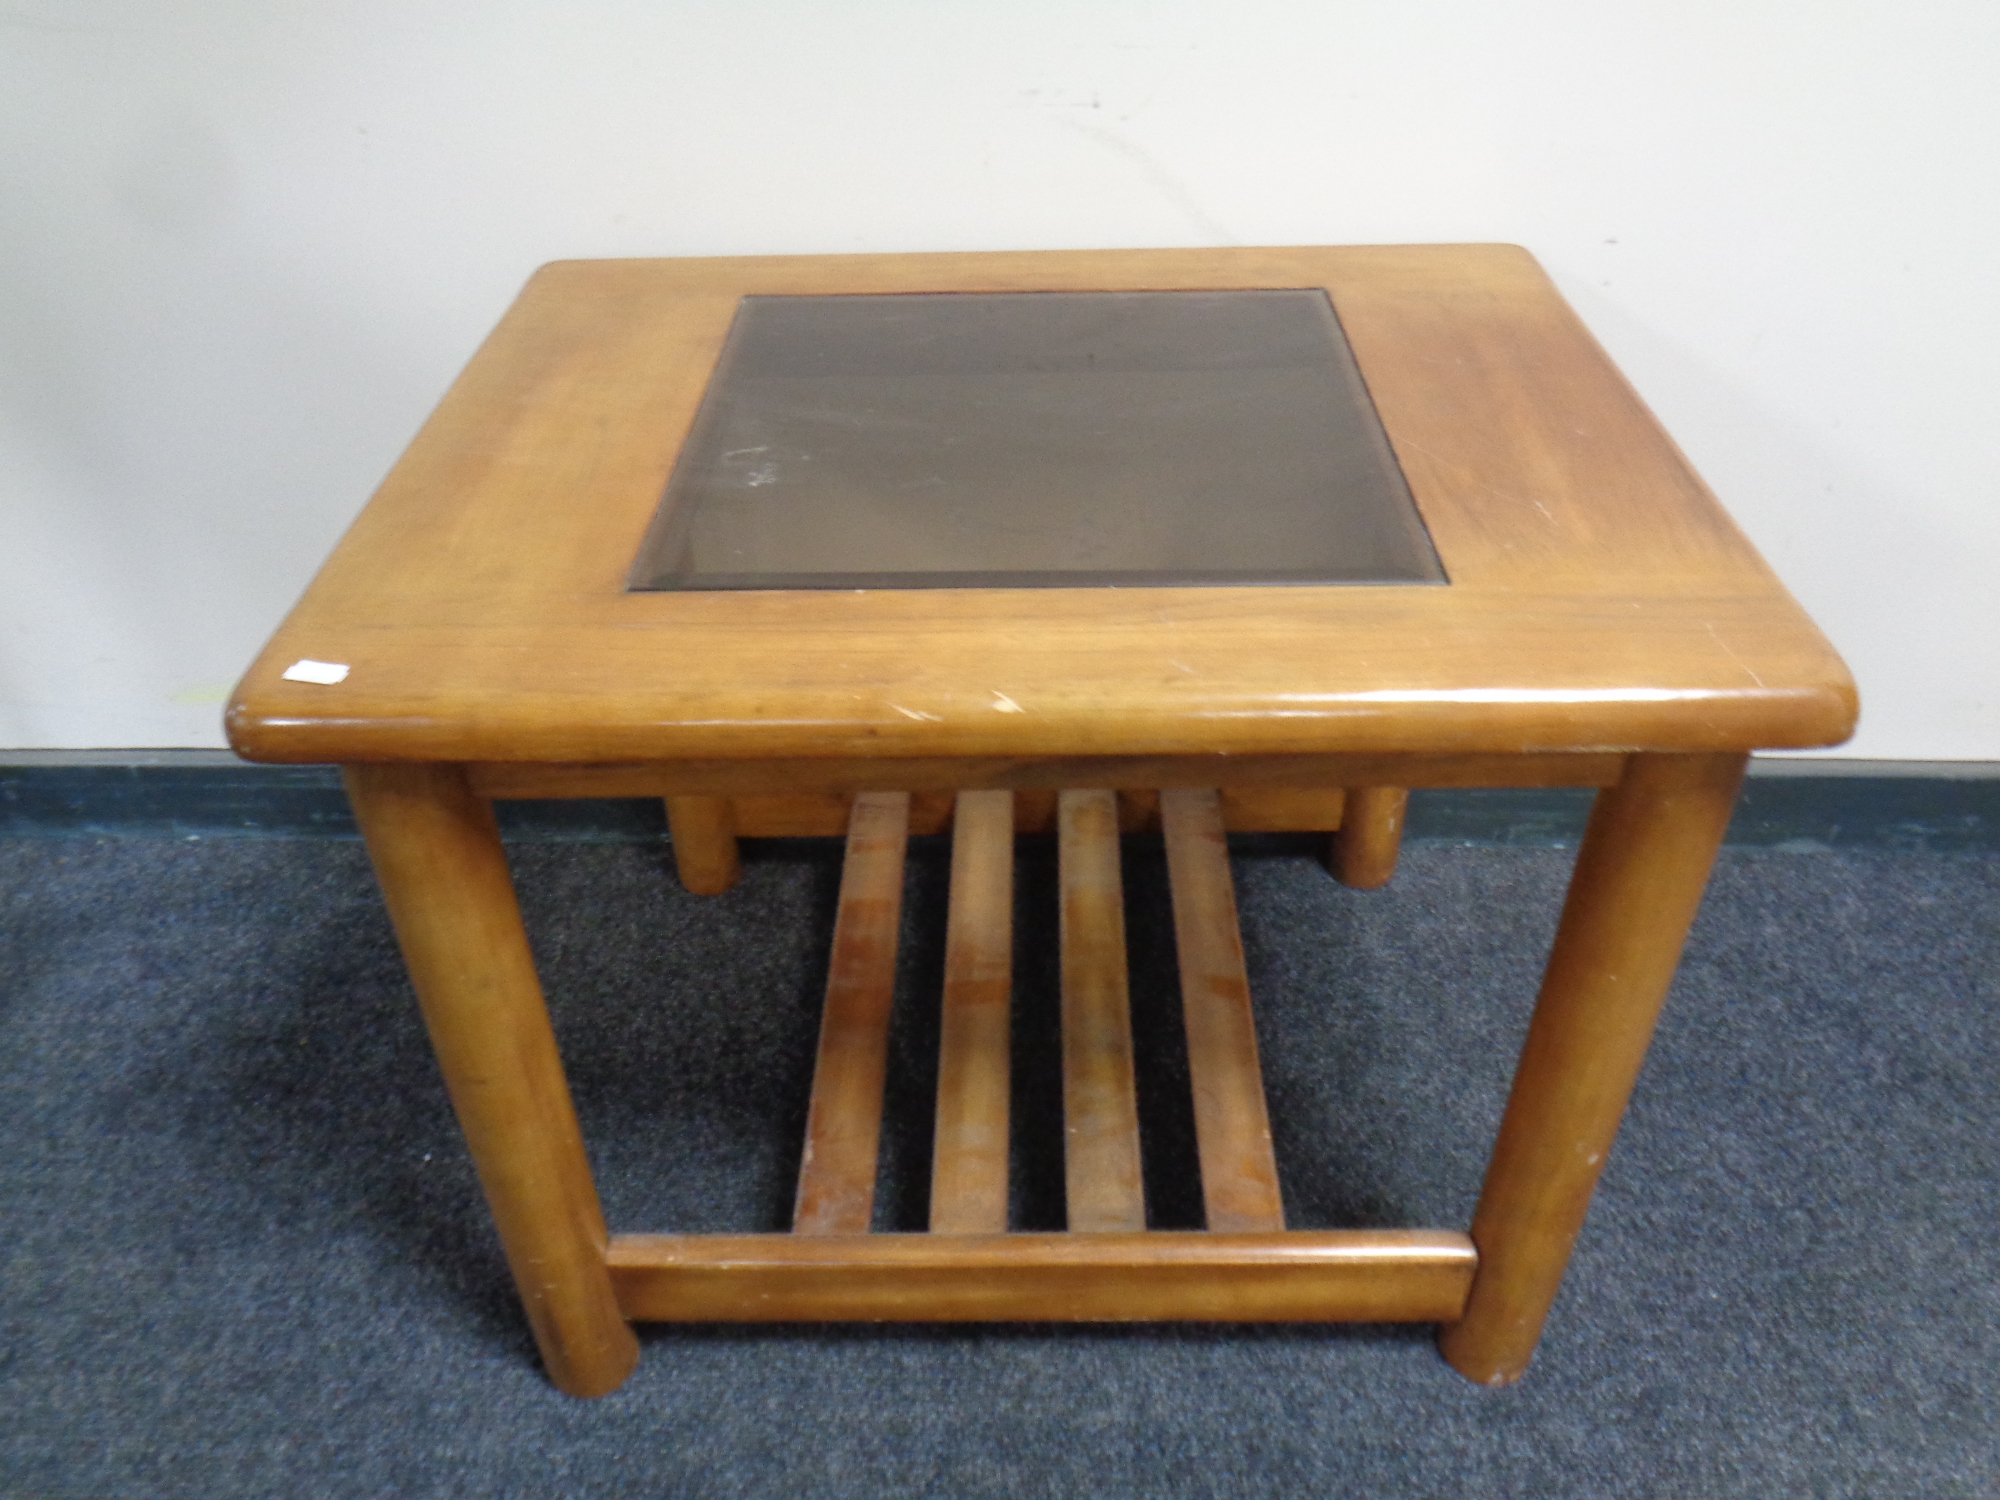 A teak coffee table with glass inset panel